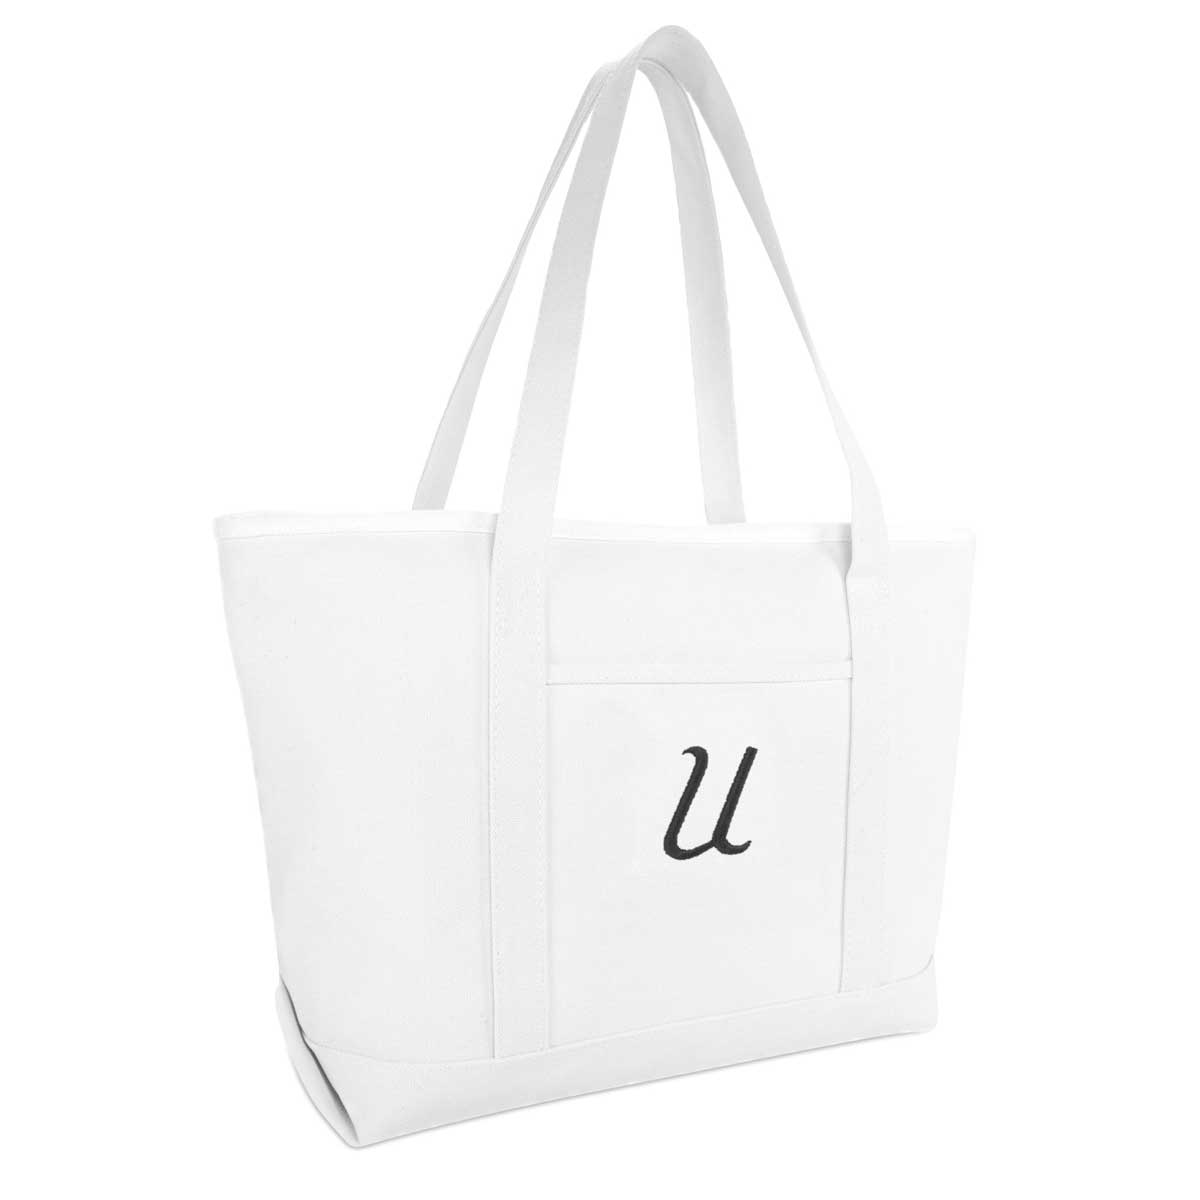 Dalix Large Canvas Tote Bag for Women Work Bag Beach Totes Monogrammed White A-Z